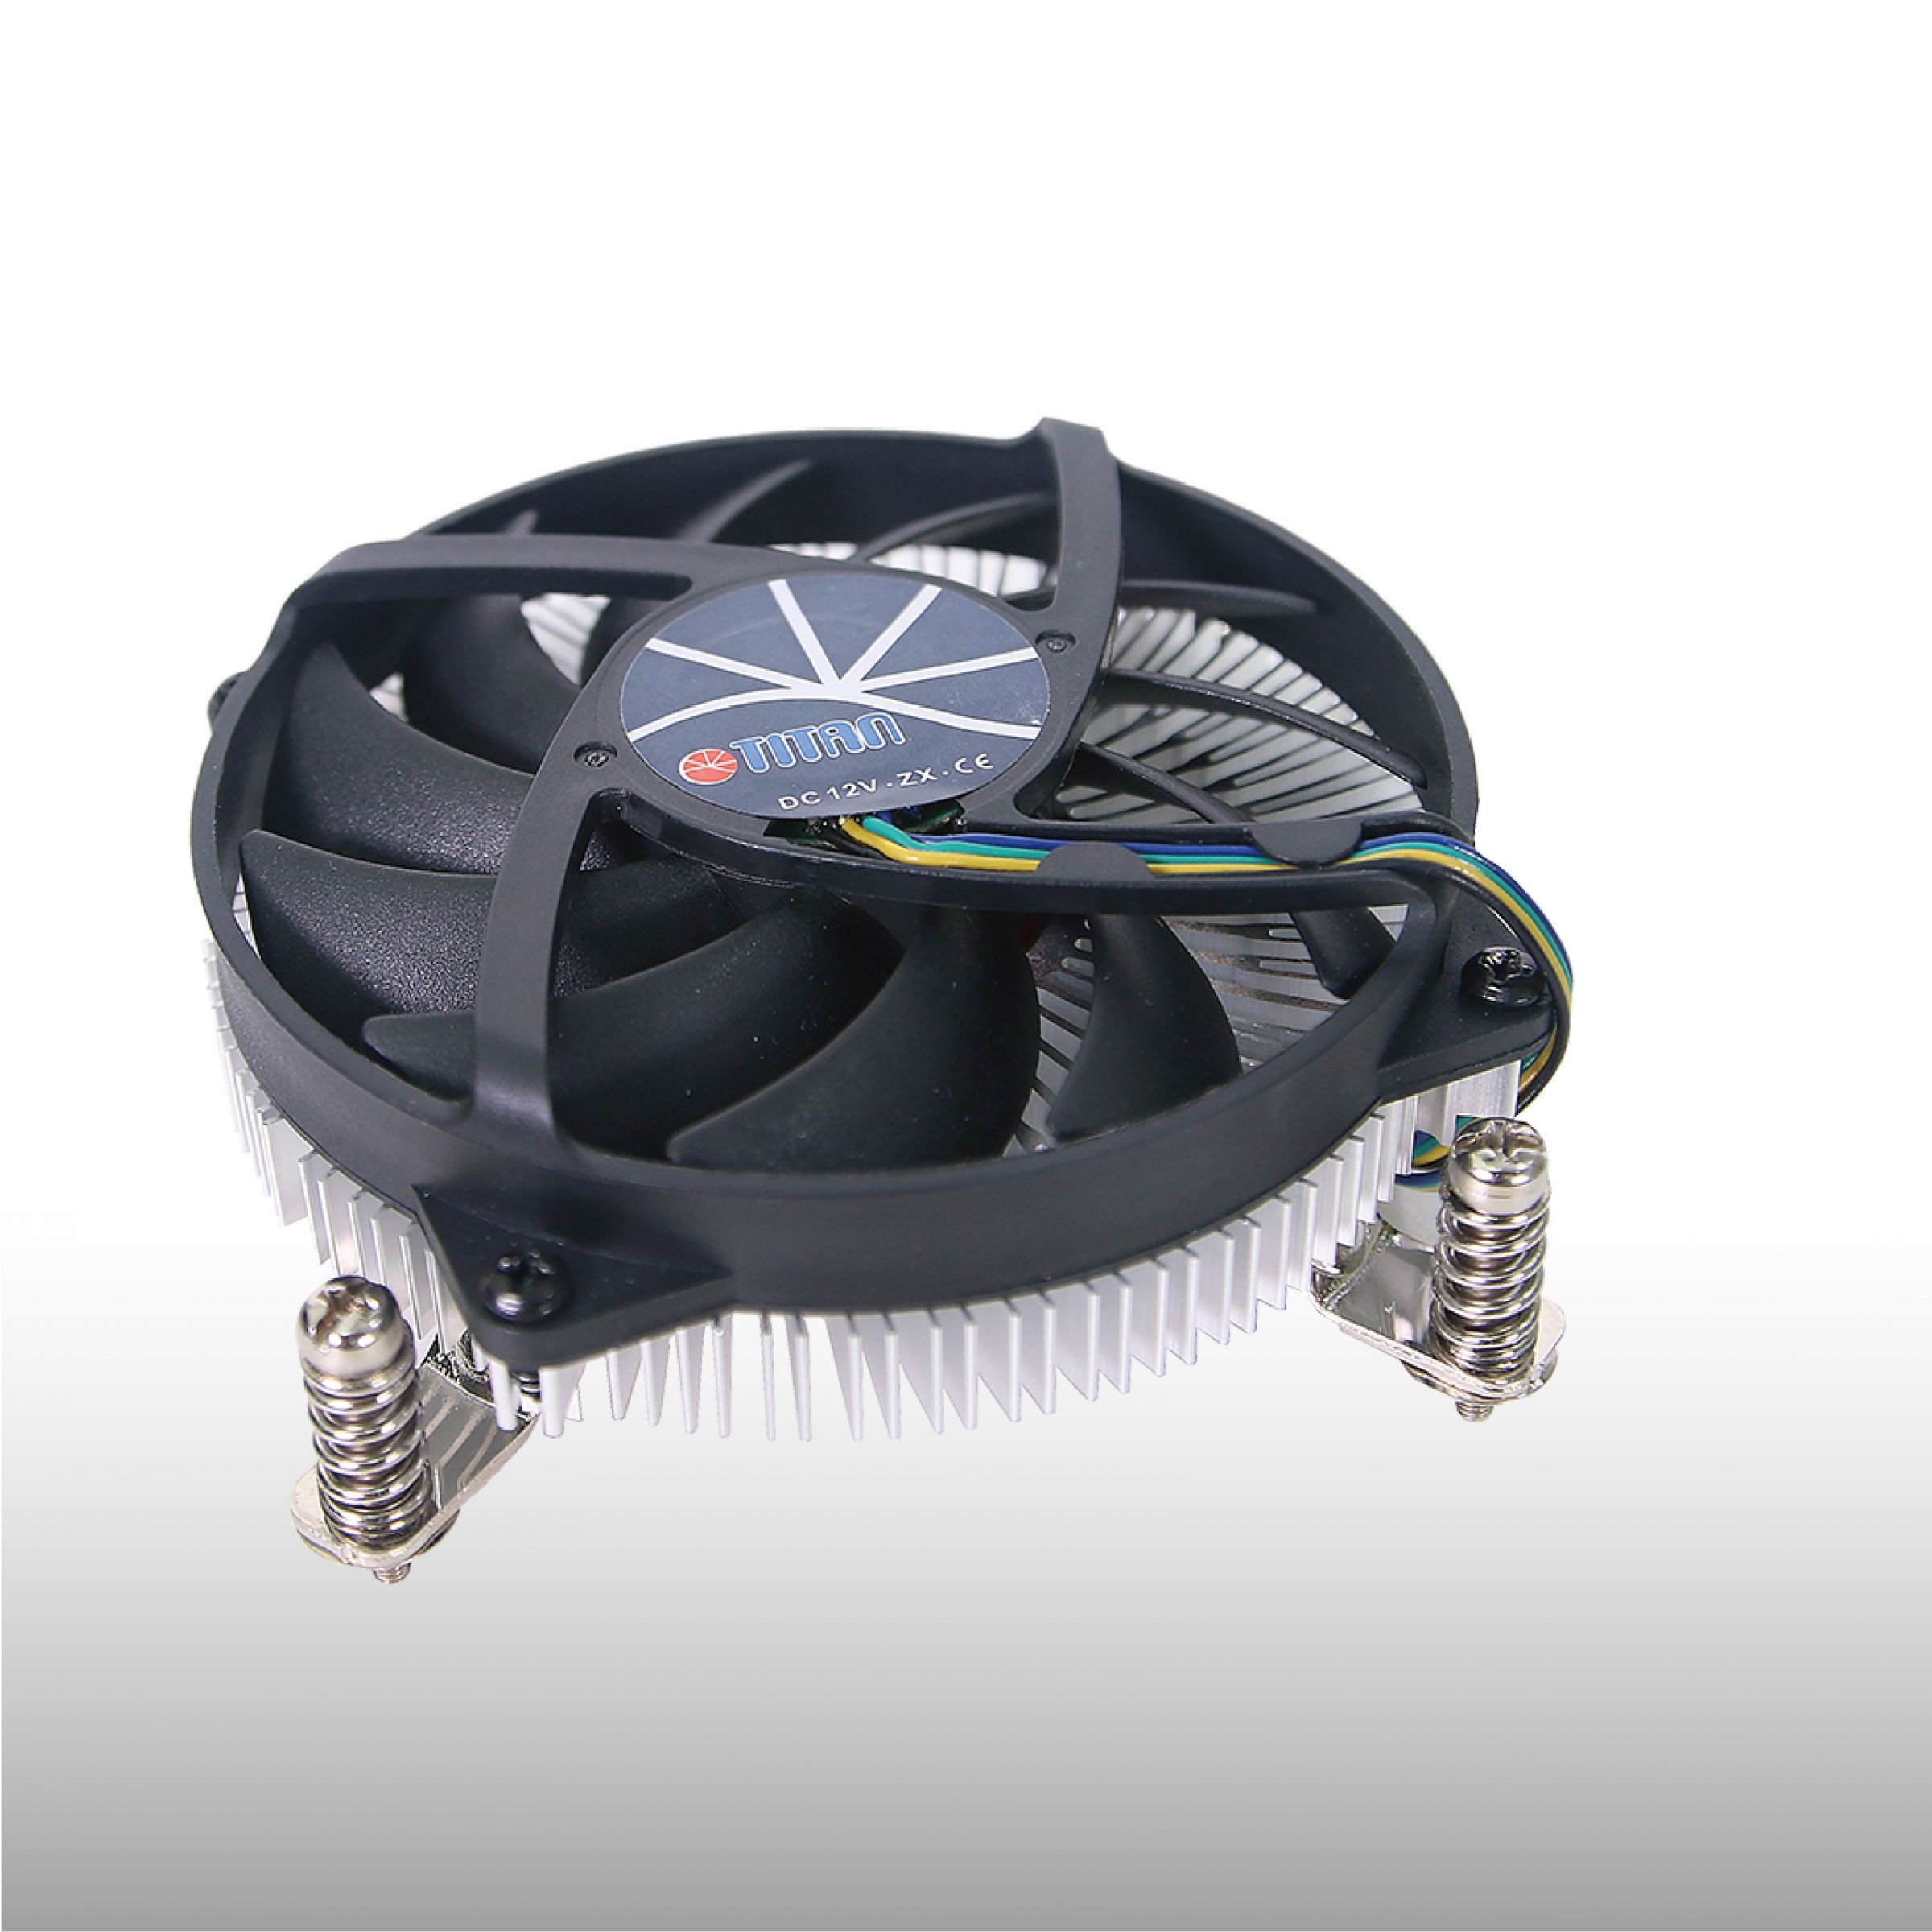 Intel LGA 1700- Low Profile Design CPU Air Cooler with Aluminum Fins/ 65W - CPU Cooler, Cooler | Made in Taiwan Custom RV Fans and Cooling Fans Manufacturer | TITAN Technology Limited